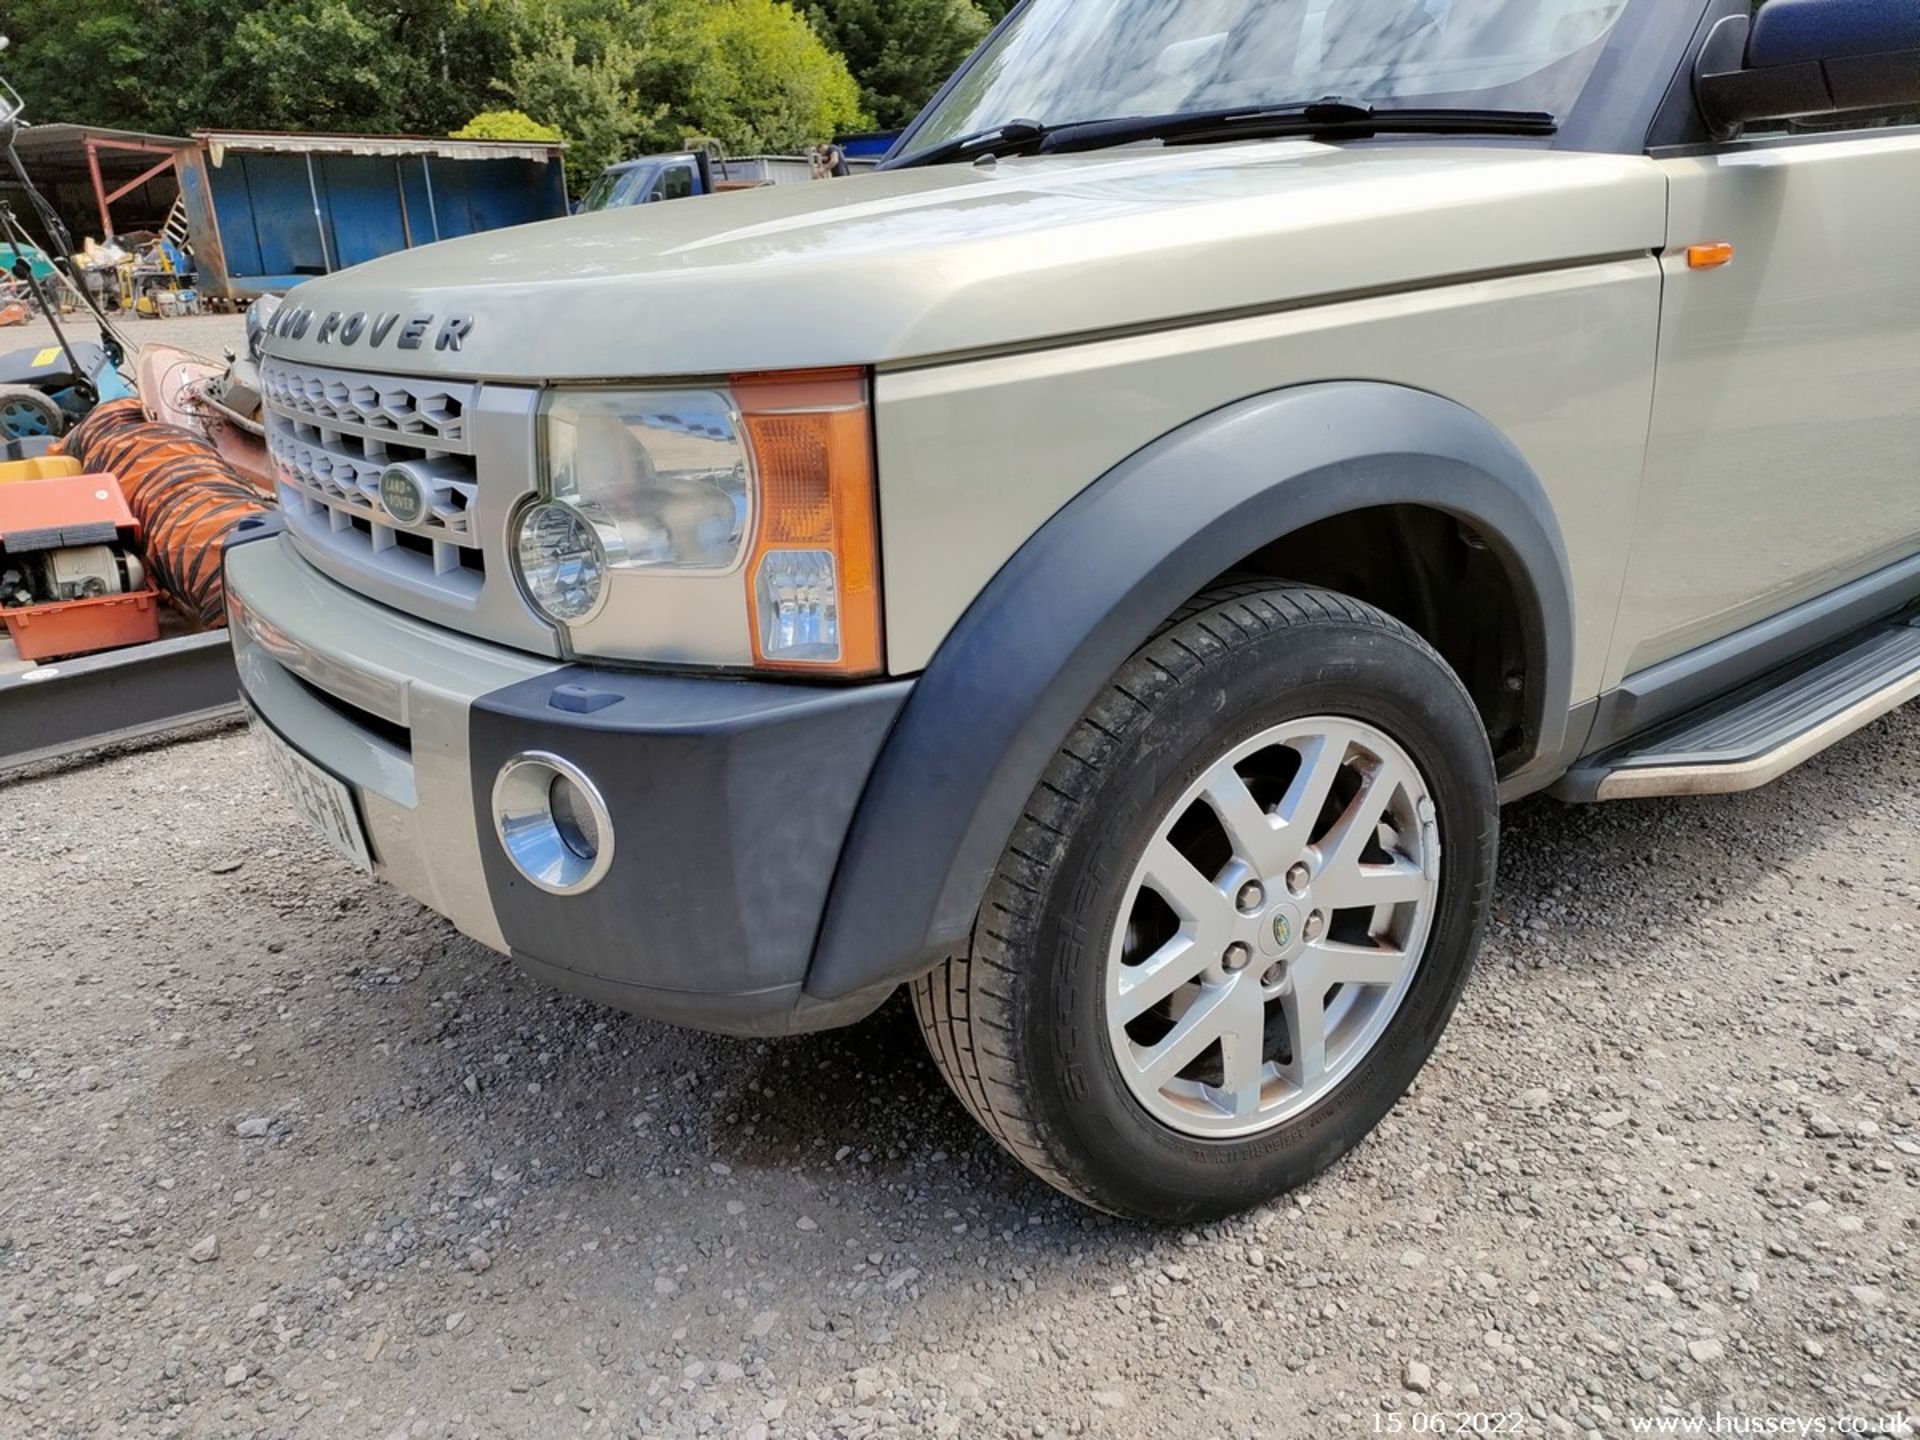 2007 LAND ROVER DISCOVERY - 2720cc 5dr Estate (Gold) - Image 2 of 25